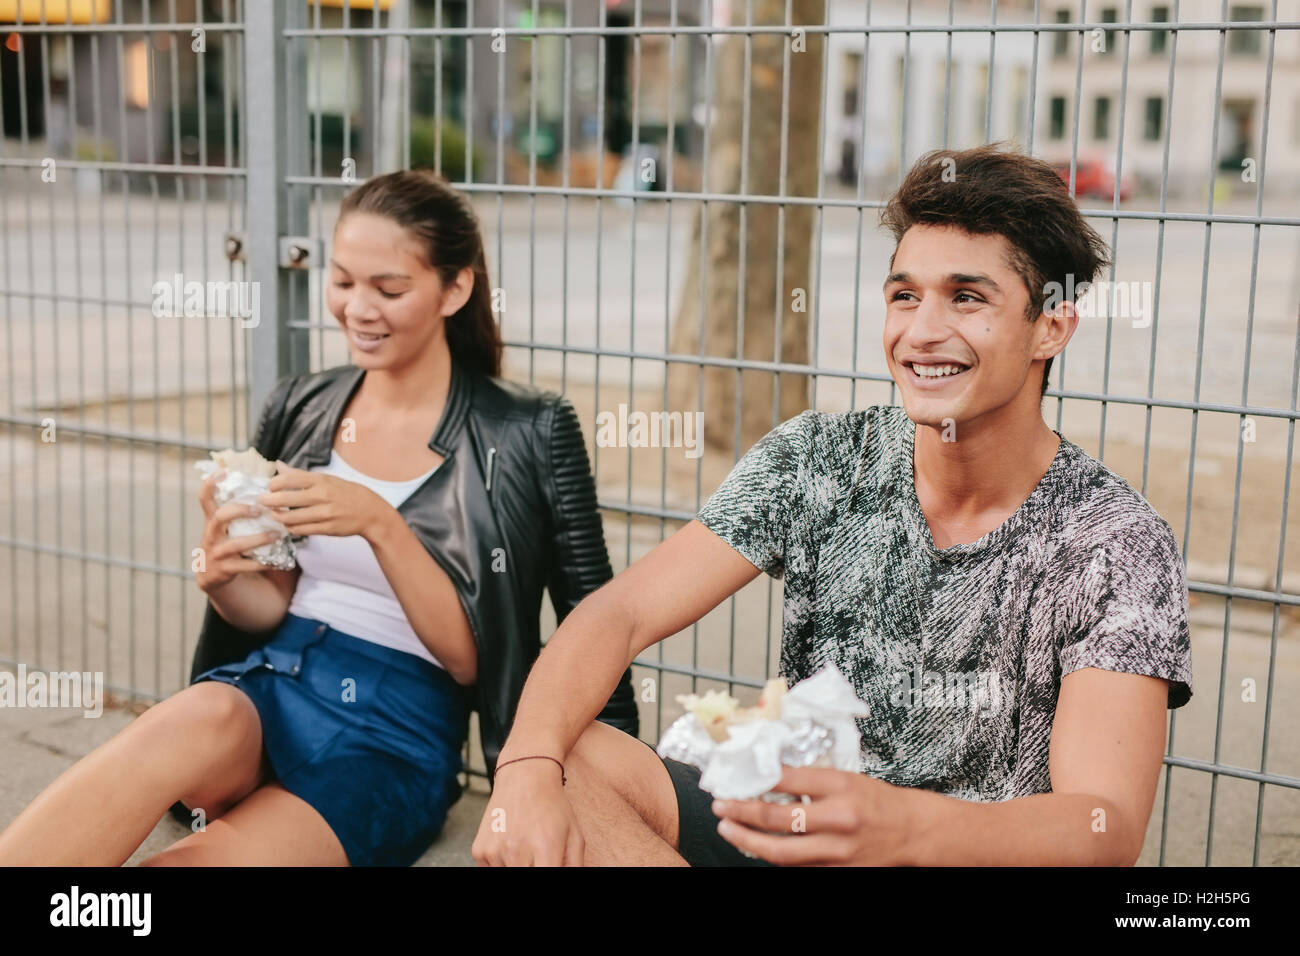 Young man and woman sitting outdoors and smiling. Teenagers relaxing outdoors and eating. Stock Photo